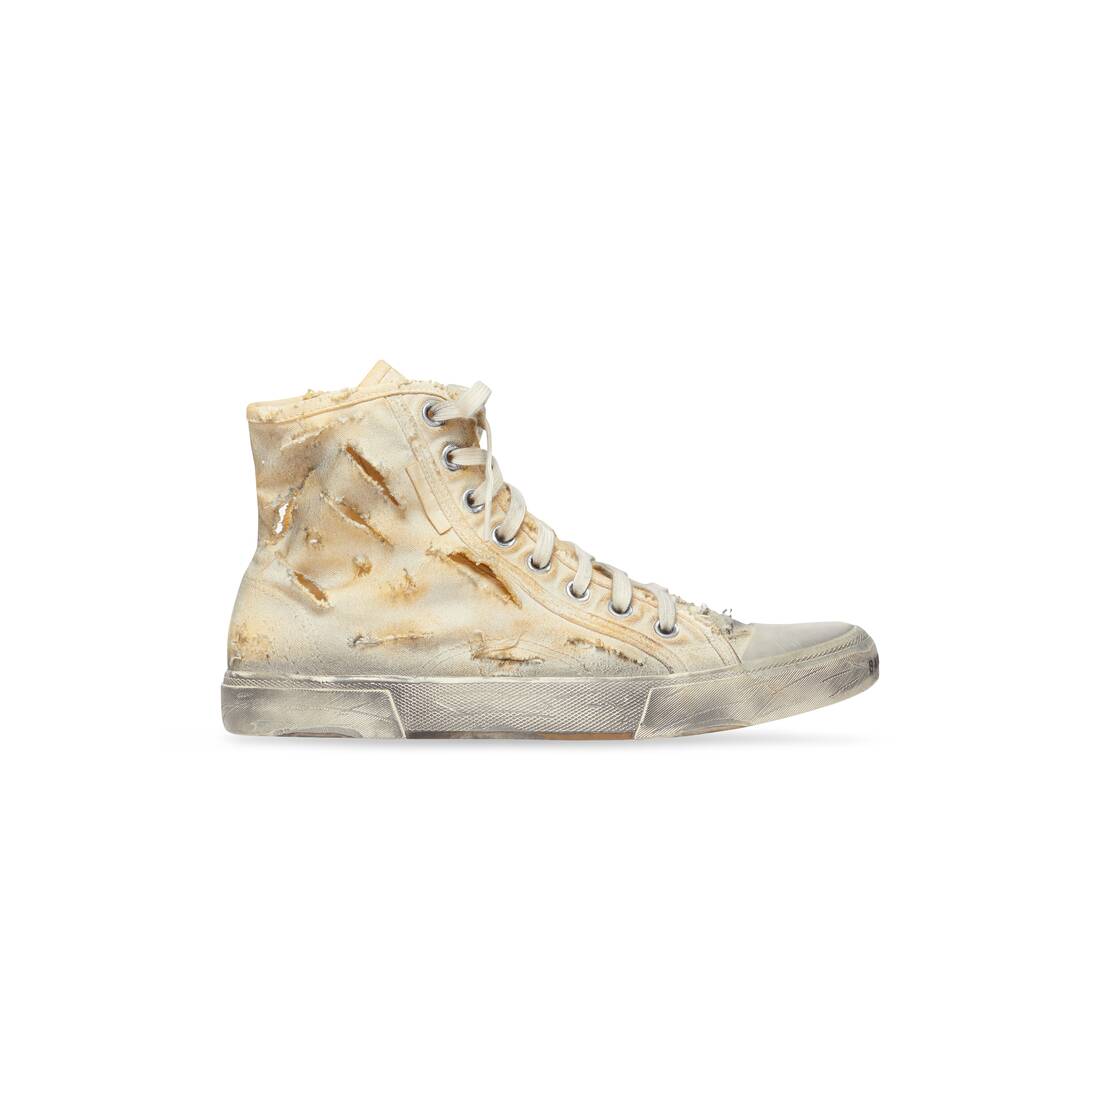 limited edition - paris high top sneaker full destroyed